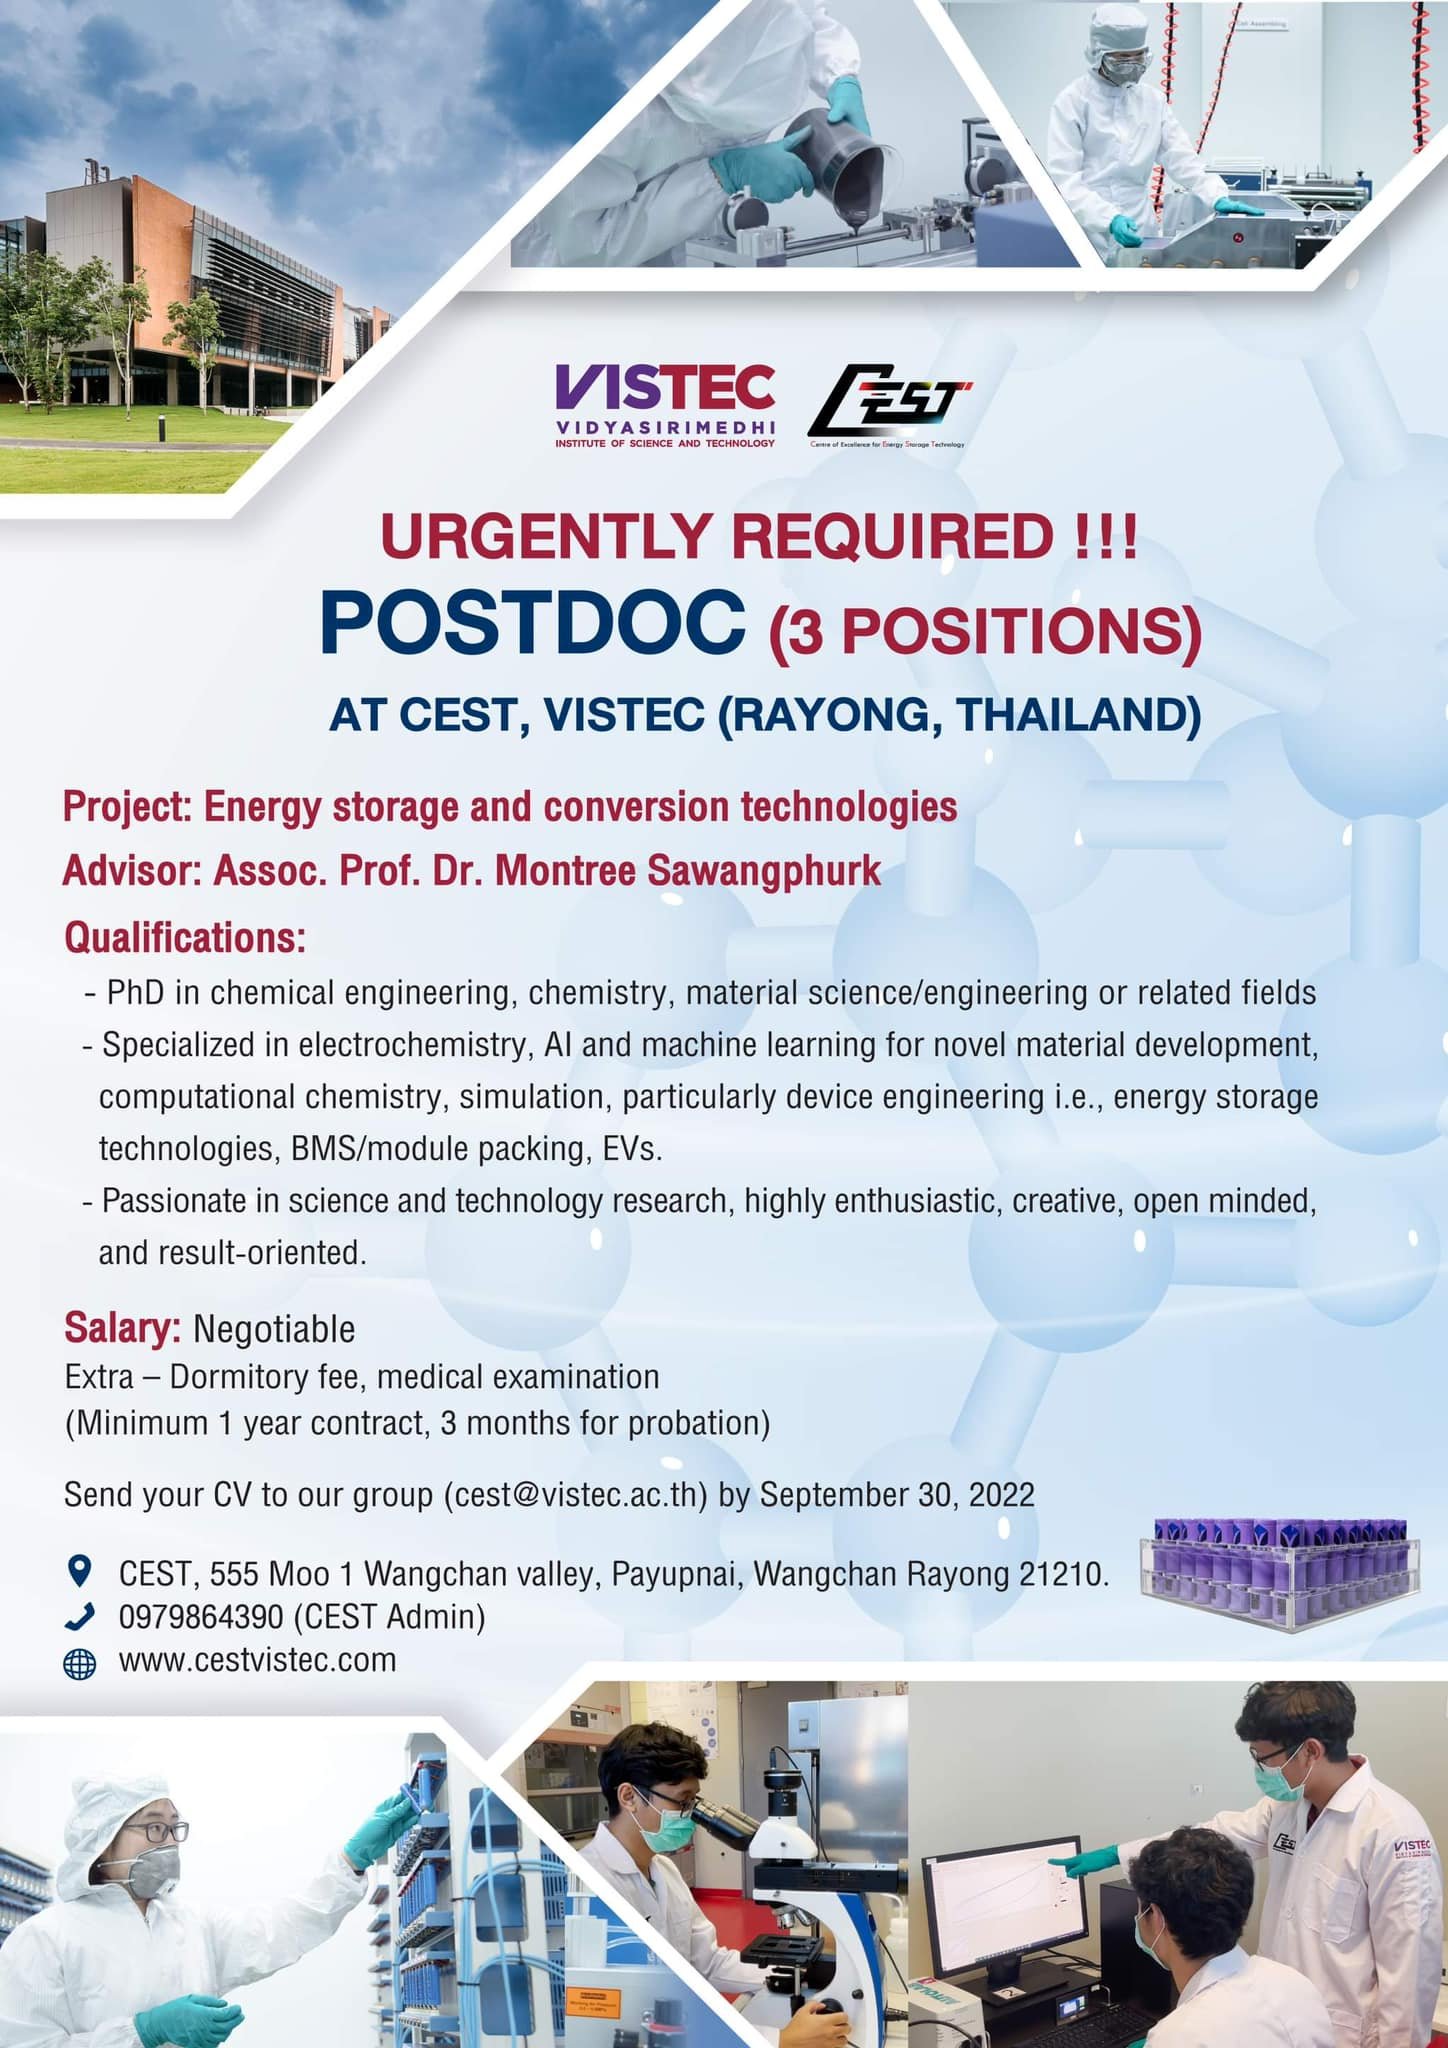 Apply now for 3 Postdoc positions at CEST, VISTEC (Rayong, Thailand) Project: Energy storage and conversion technologies Advisor: Assoc. Prof. Dr. Montree Sawangphurk